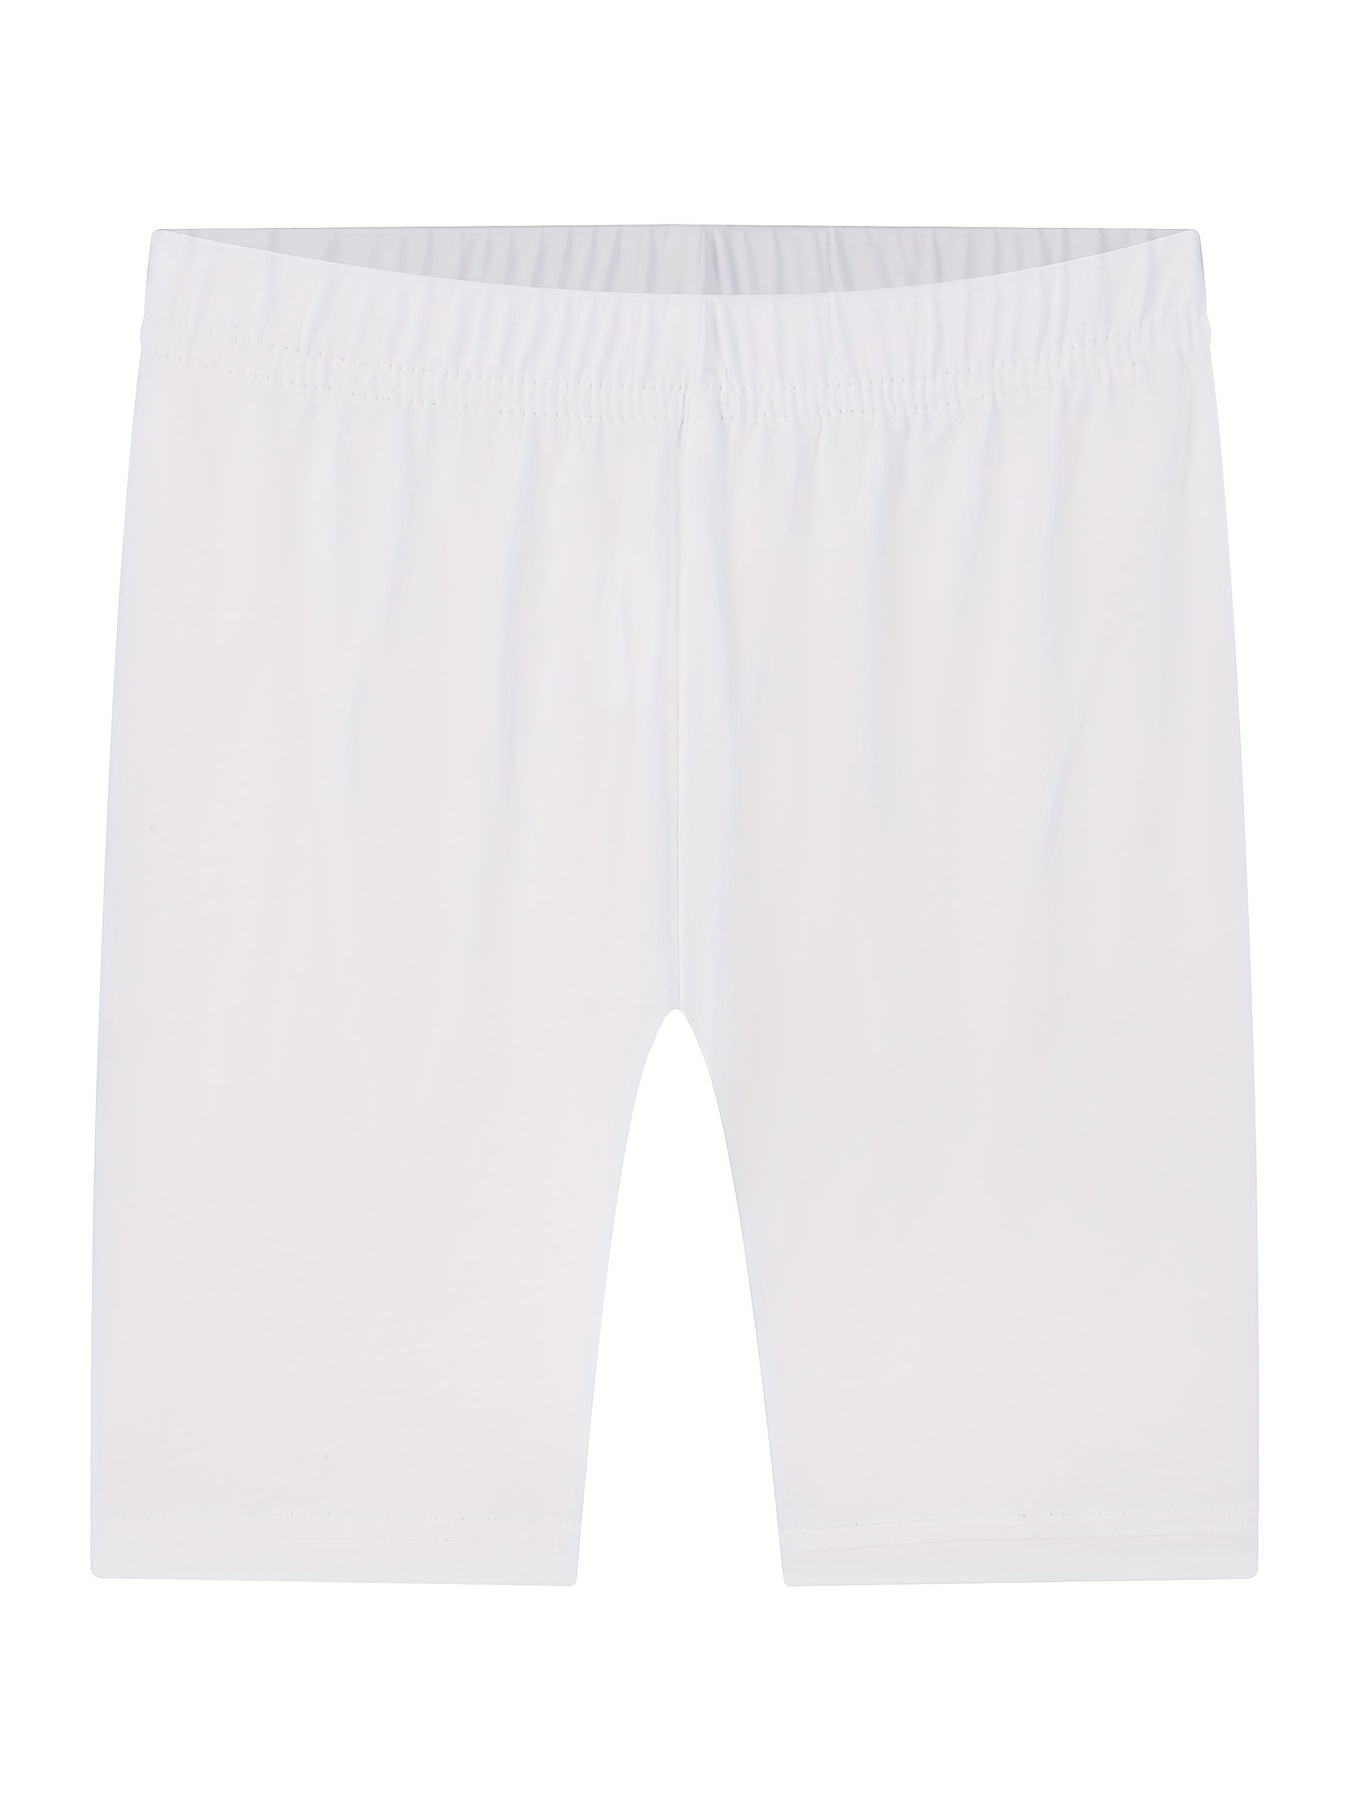 SAFETY SHORTS IN IVORY